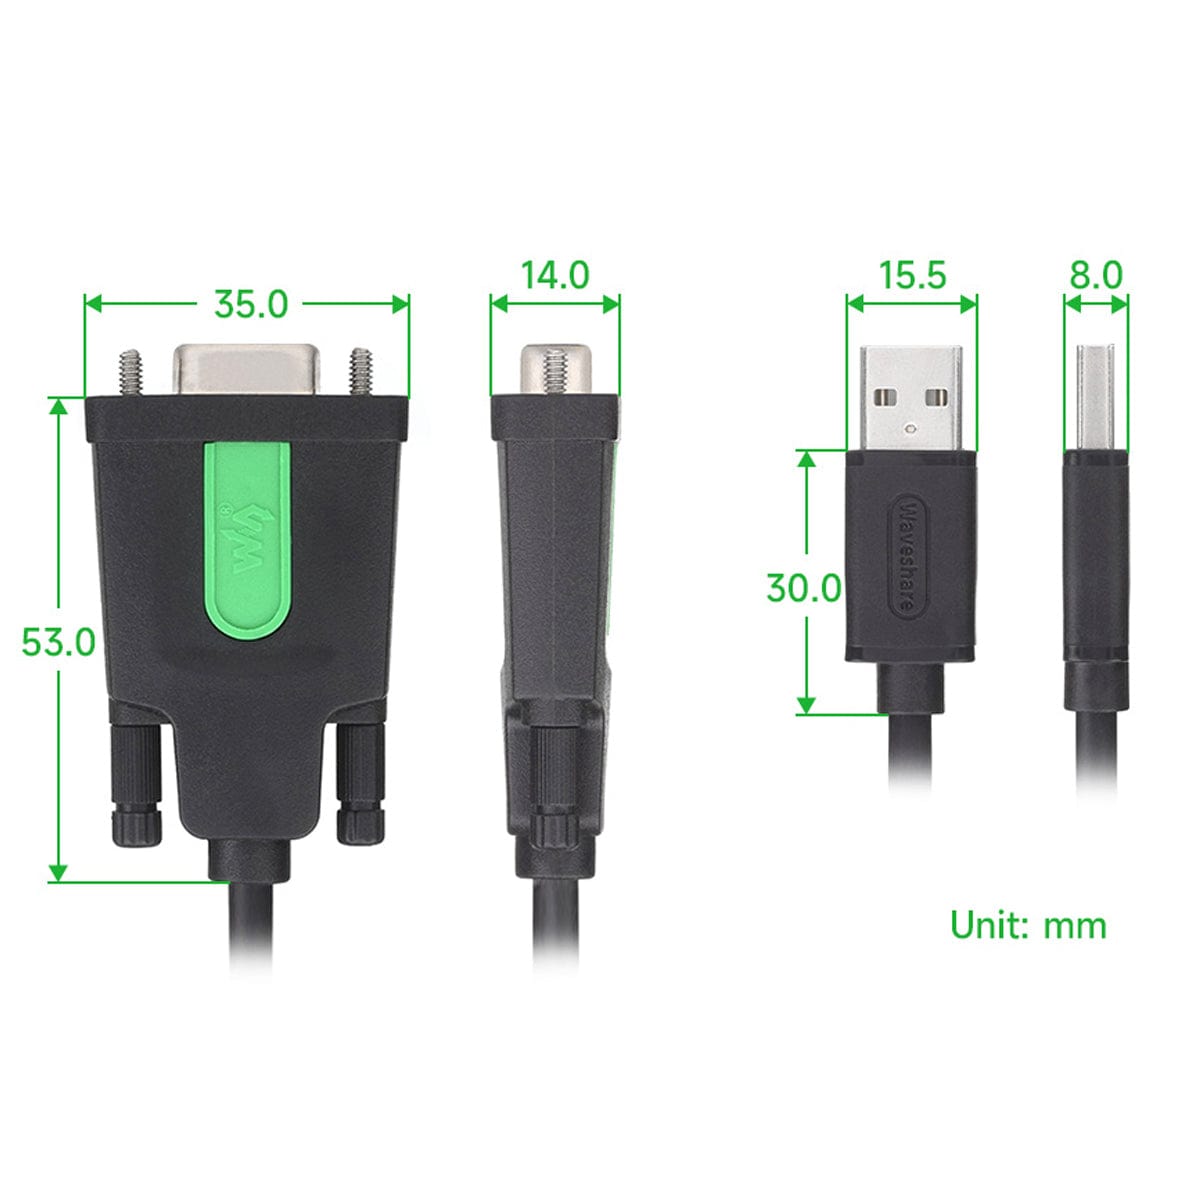 Industrial USB To RS232 Male Serial Adapter Cable - The Pi Hut